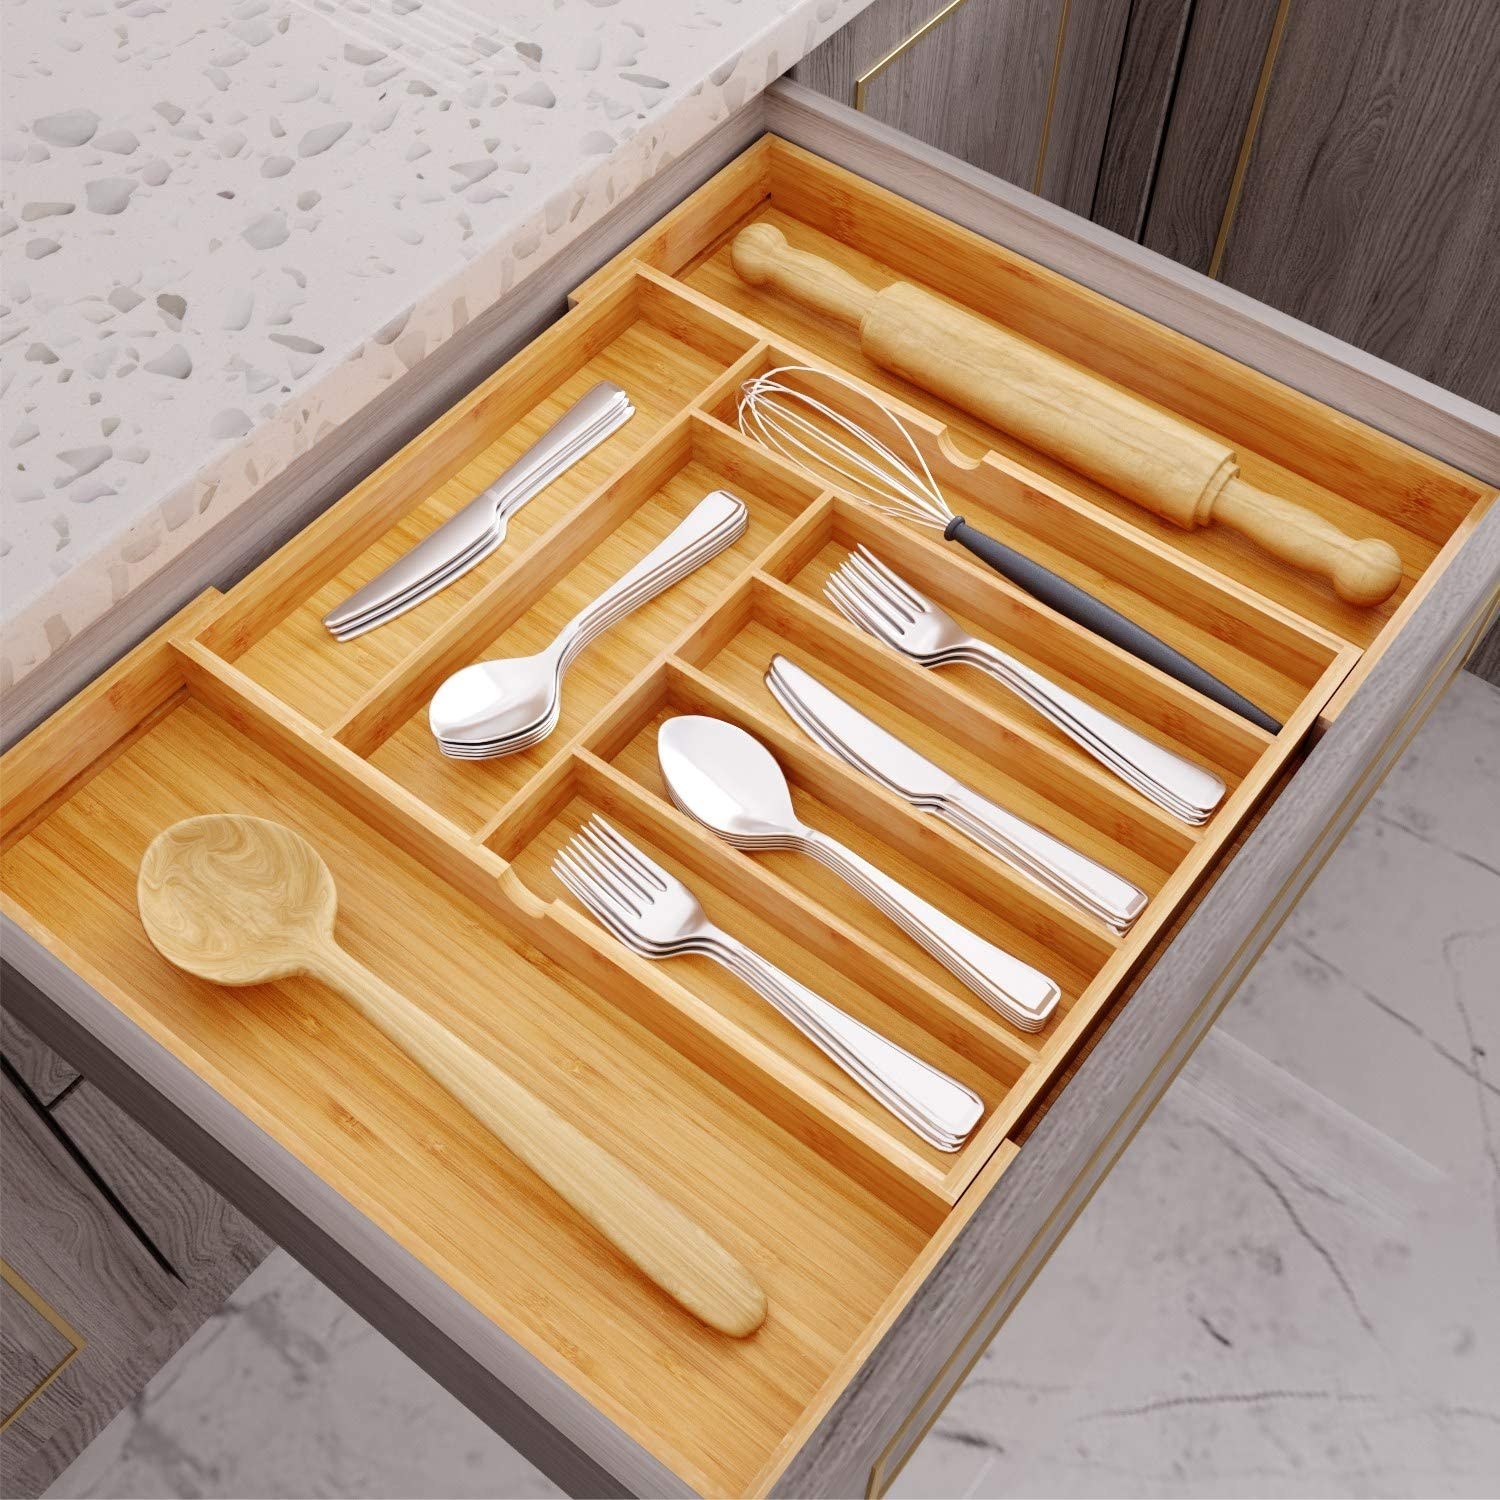 An open kitchen drawer with the bamboo organizer perfectly inside. It has 10 different sized compartments for utensils.